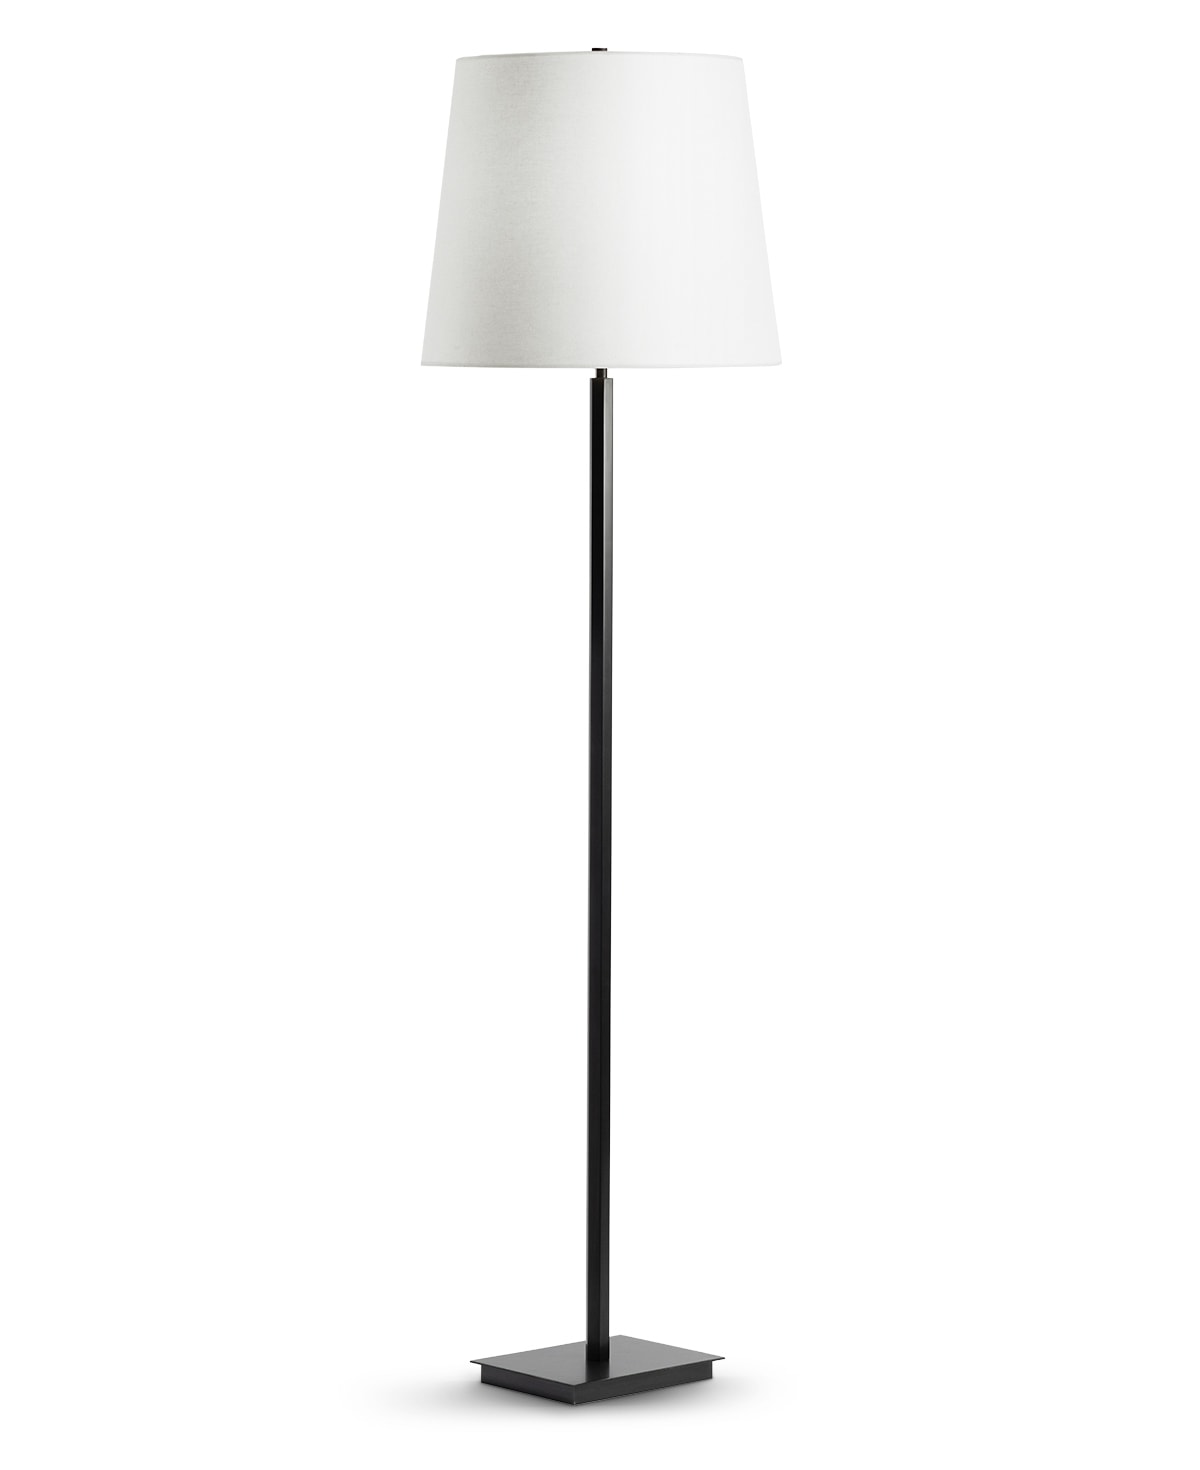 FlowDecor Rebecca Floor Lamp in metal with bronze finish and off-white linen tapered drum shade (# 4600)